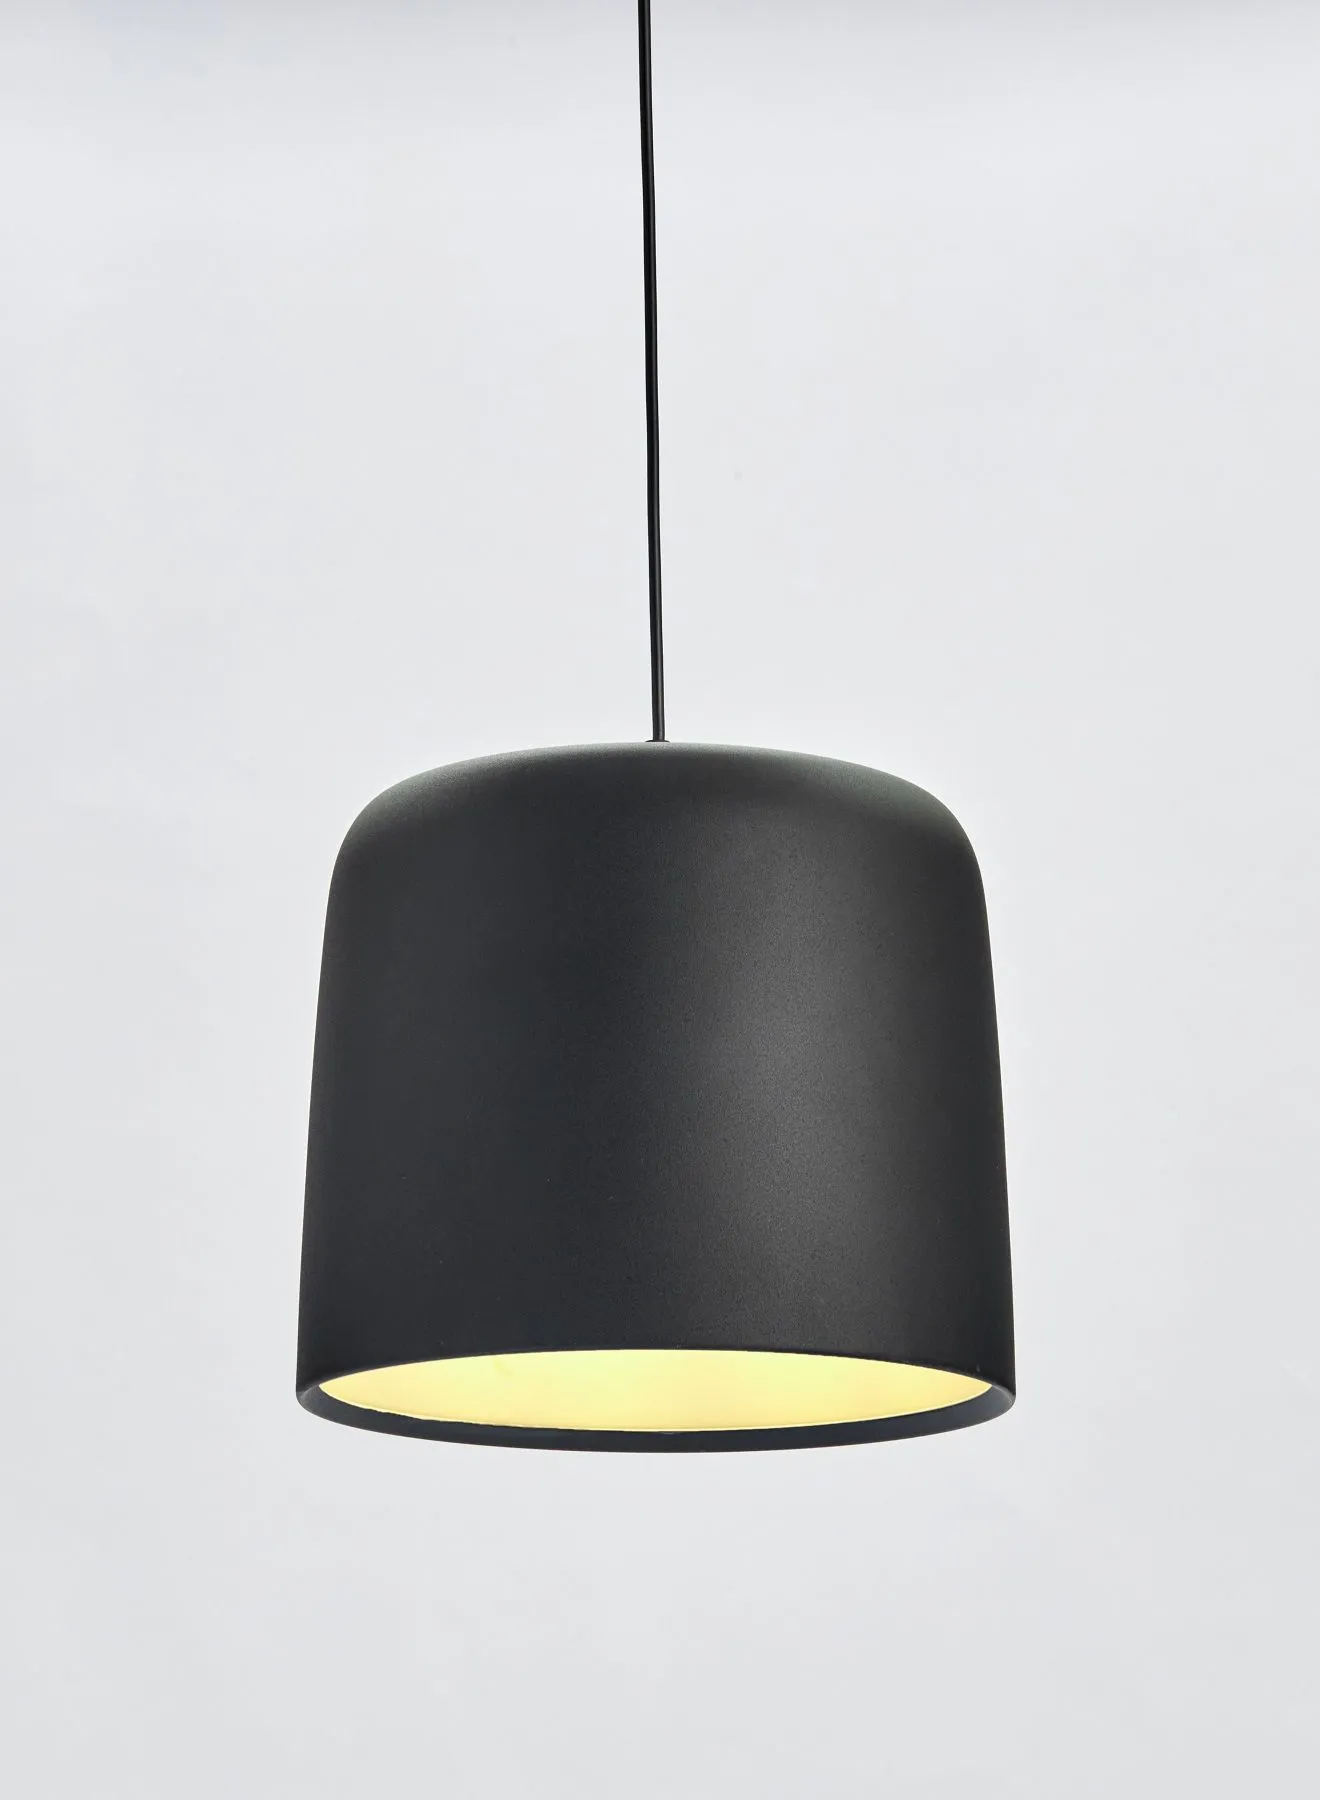 Switch Decorative Pendant Lamp Unique Luxury Quality Material for the Perfect Stylish Home PL014101 Black 31cm